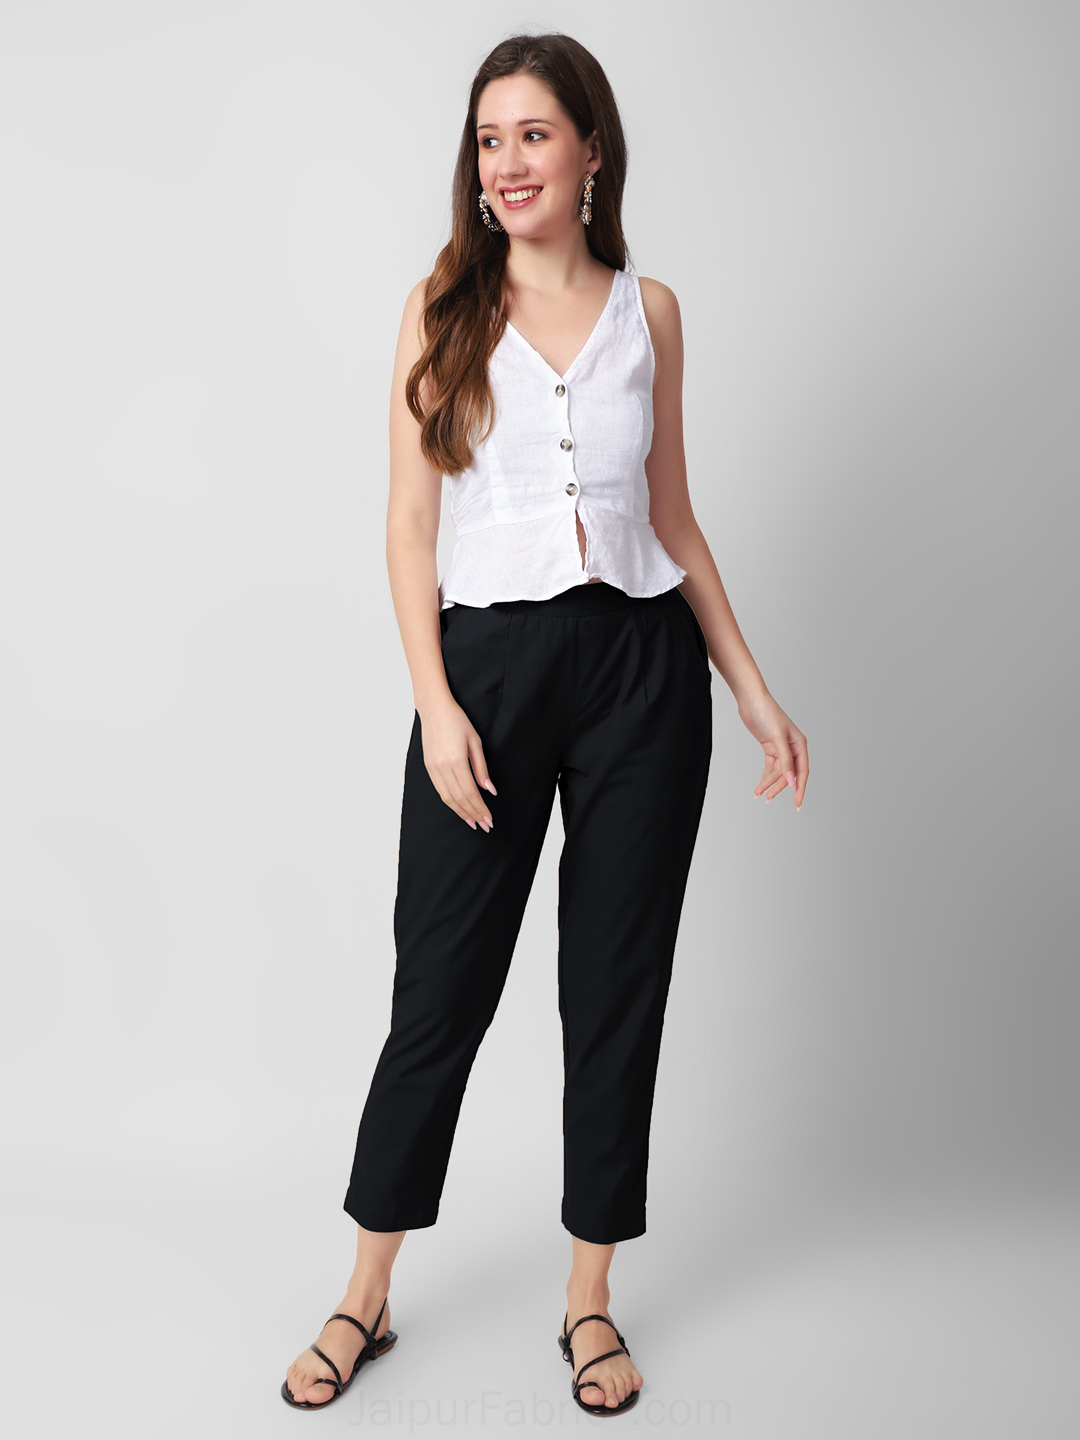 Express | Super High Waisted Novelty Button Trouser Pant in Pitch Black |  Express Style Trial